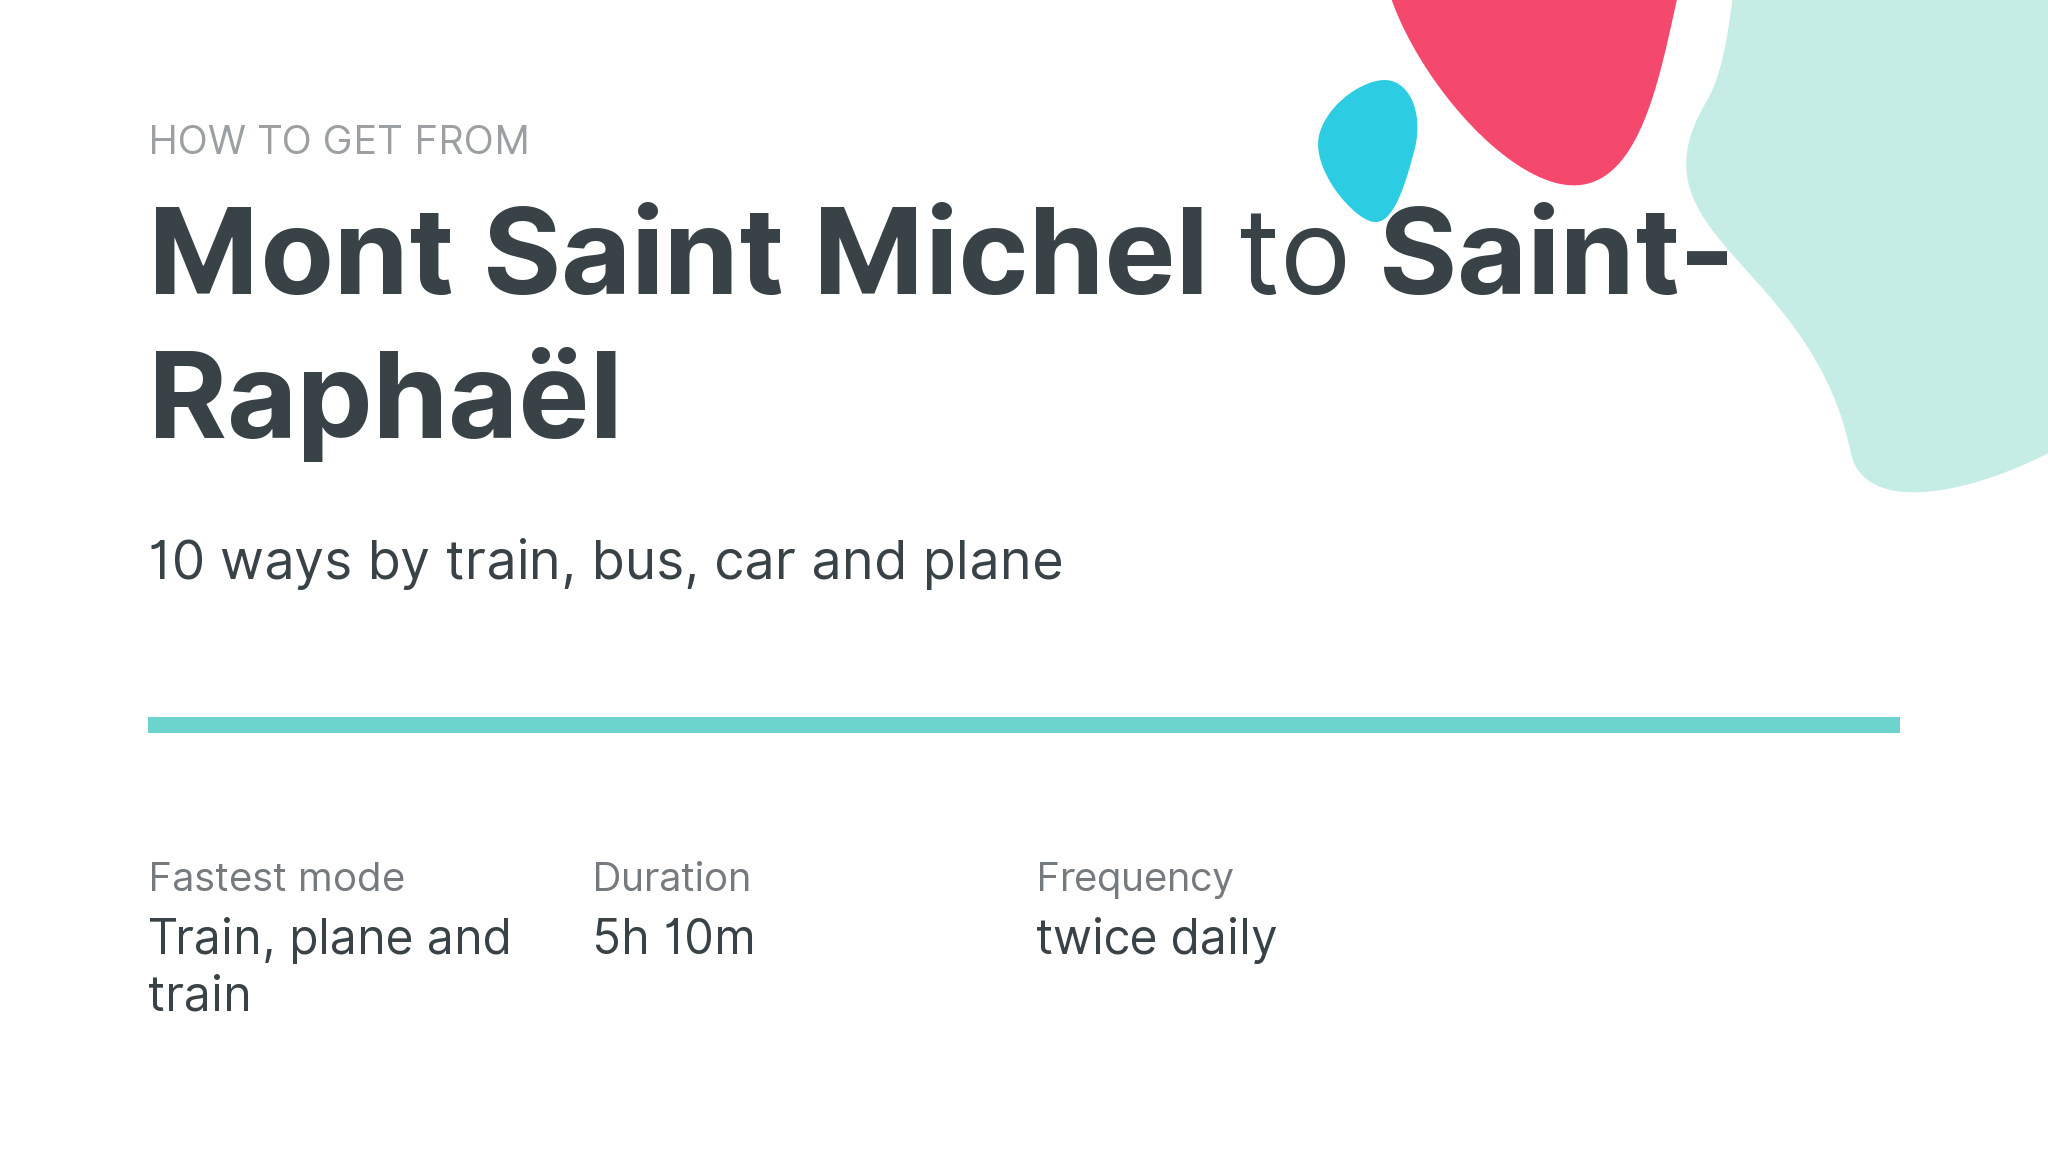 How do I get from Mont Saint Michel to Saint-Raphaël